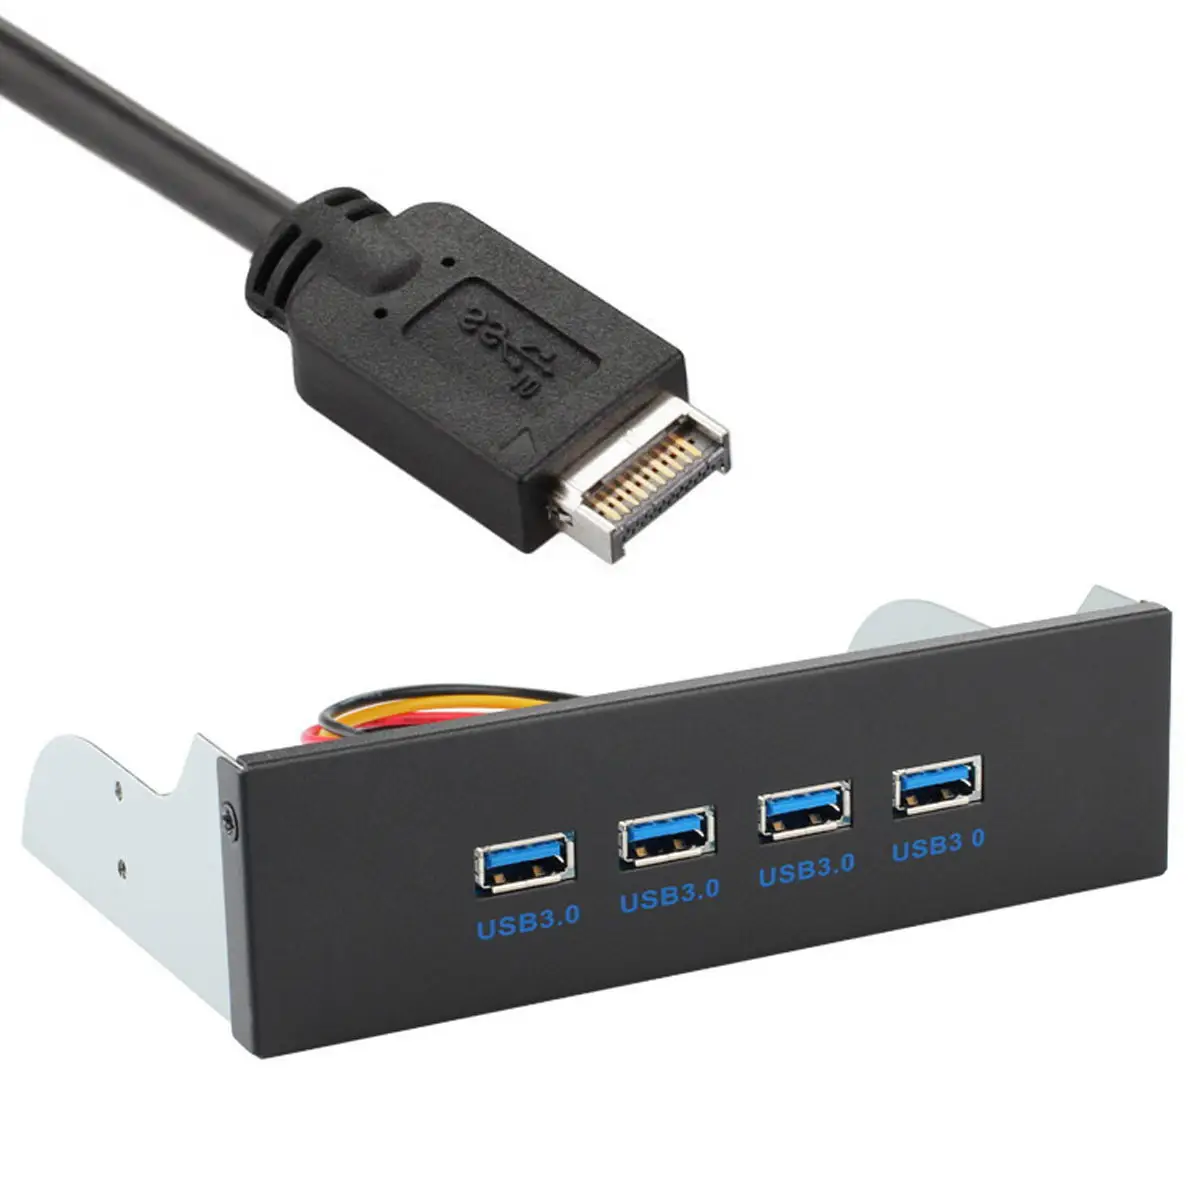 

Chenyang USB 3.1 Front Panel Header to USB 3.0 HUB 4 Ports Front Panel Motherboard Cable for 5.25" CD-ROM Bay